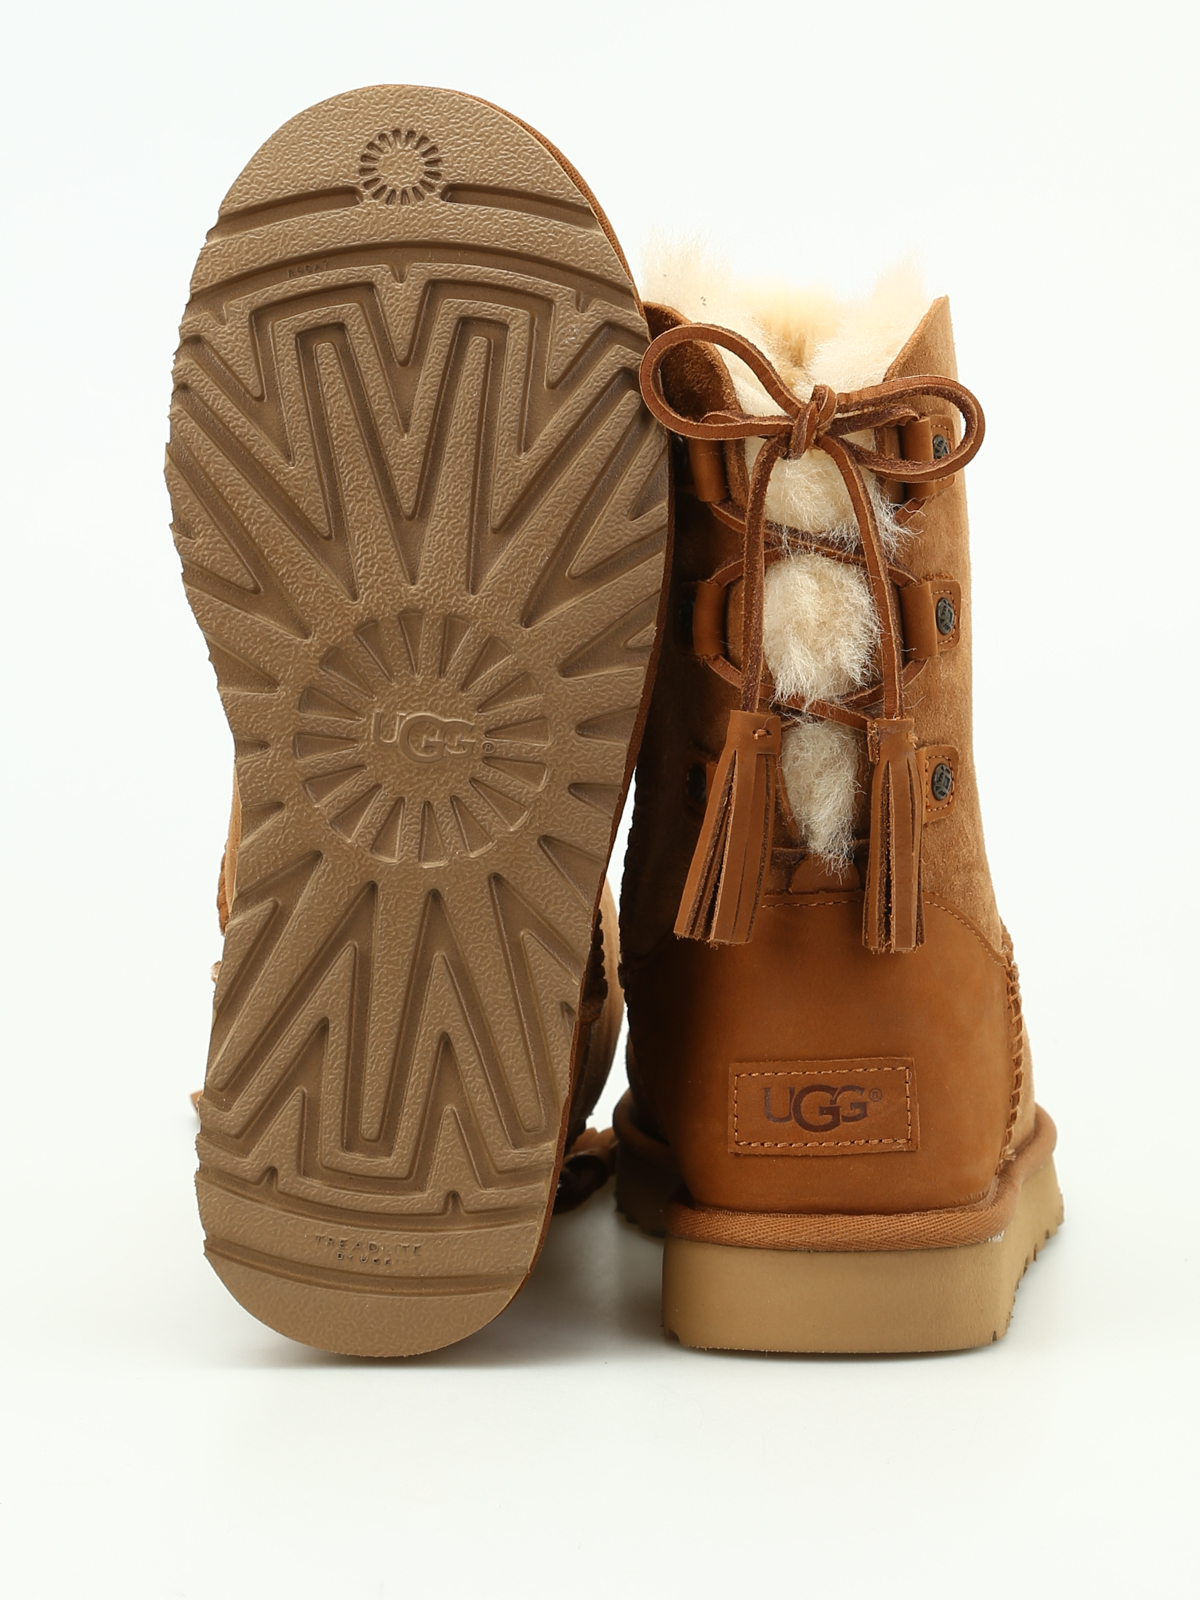 ugg boots with tassels